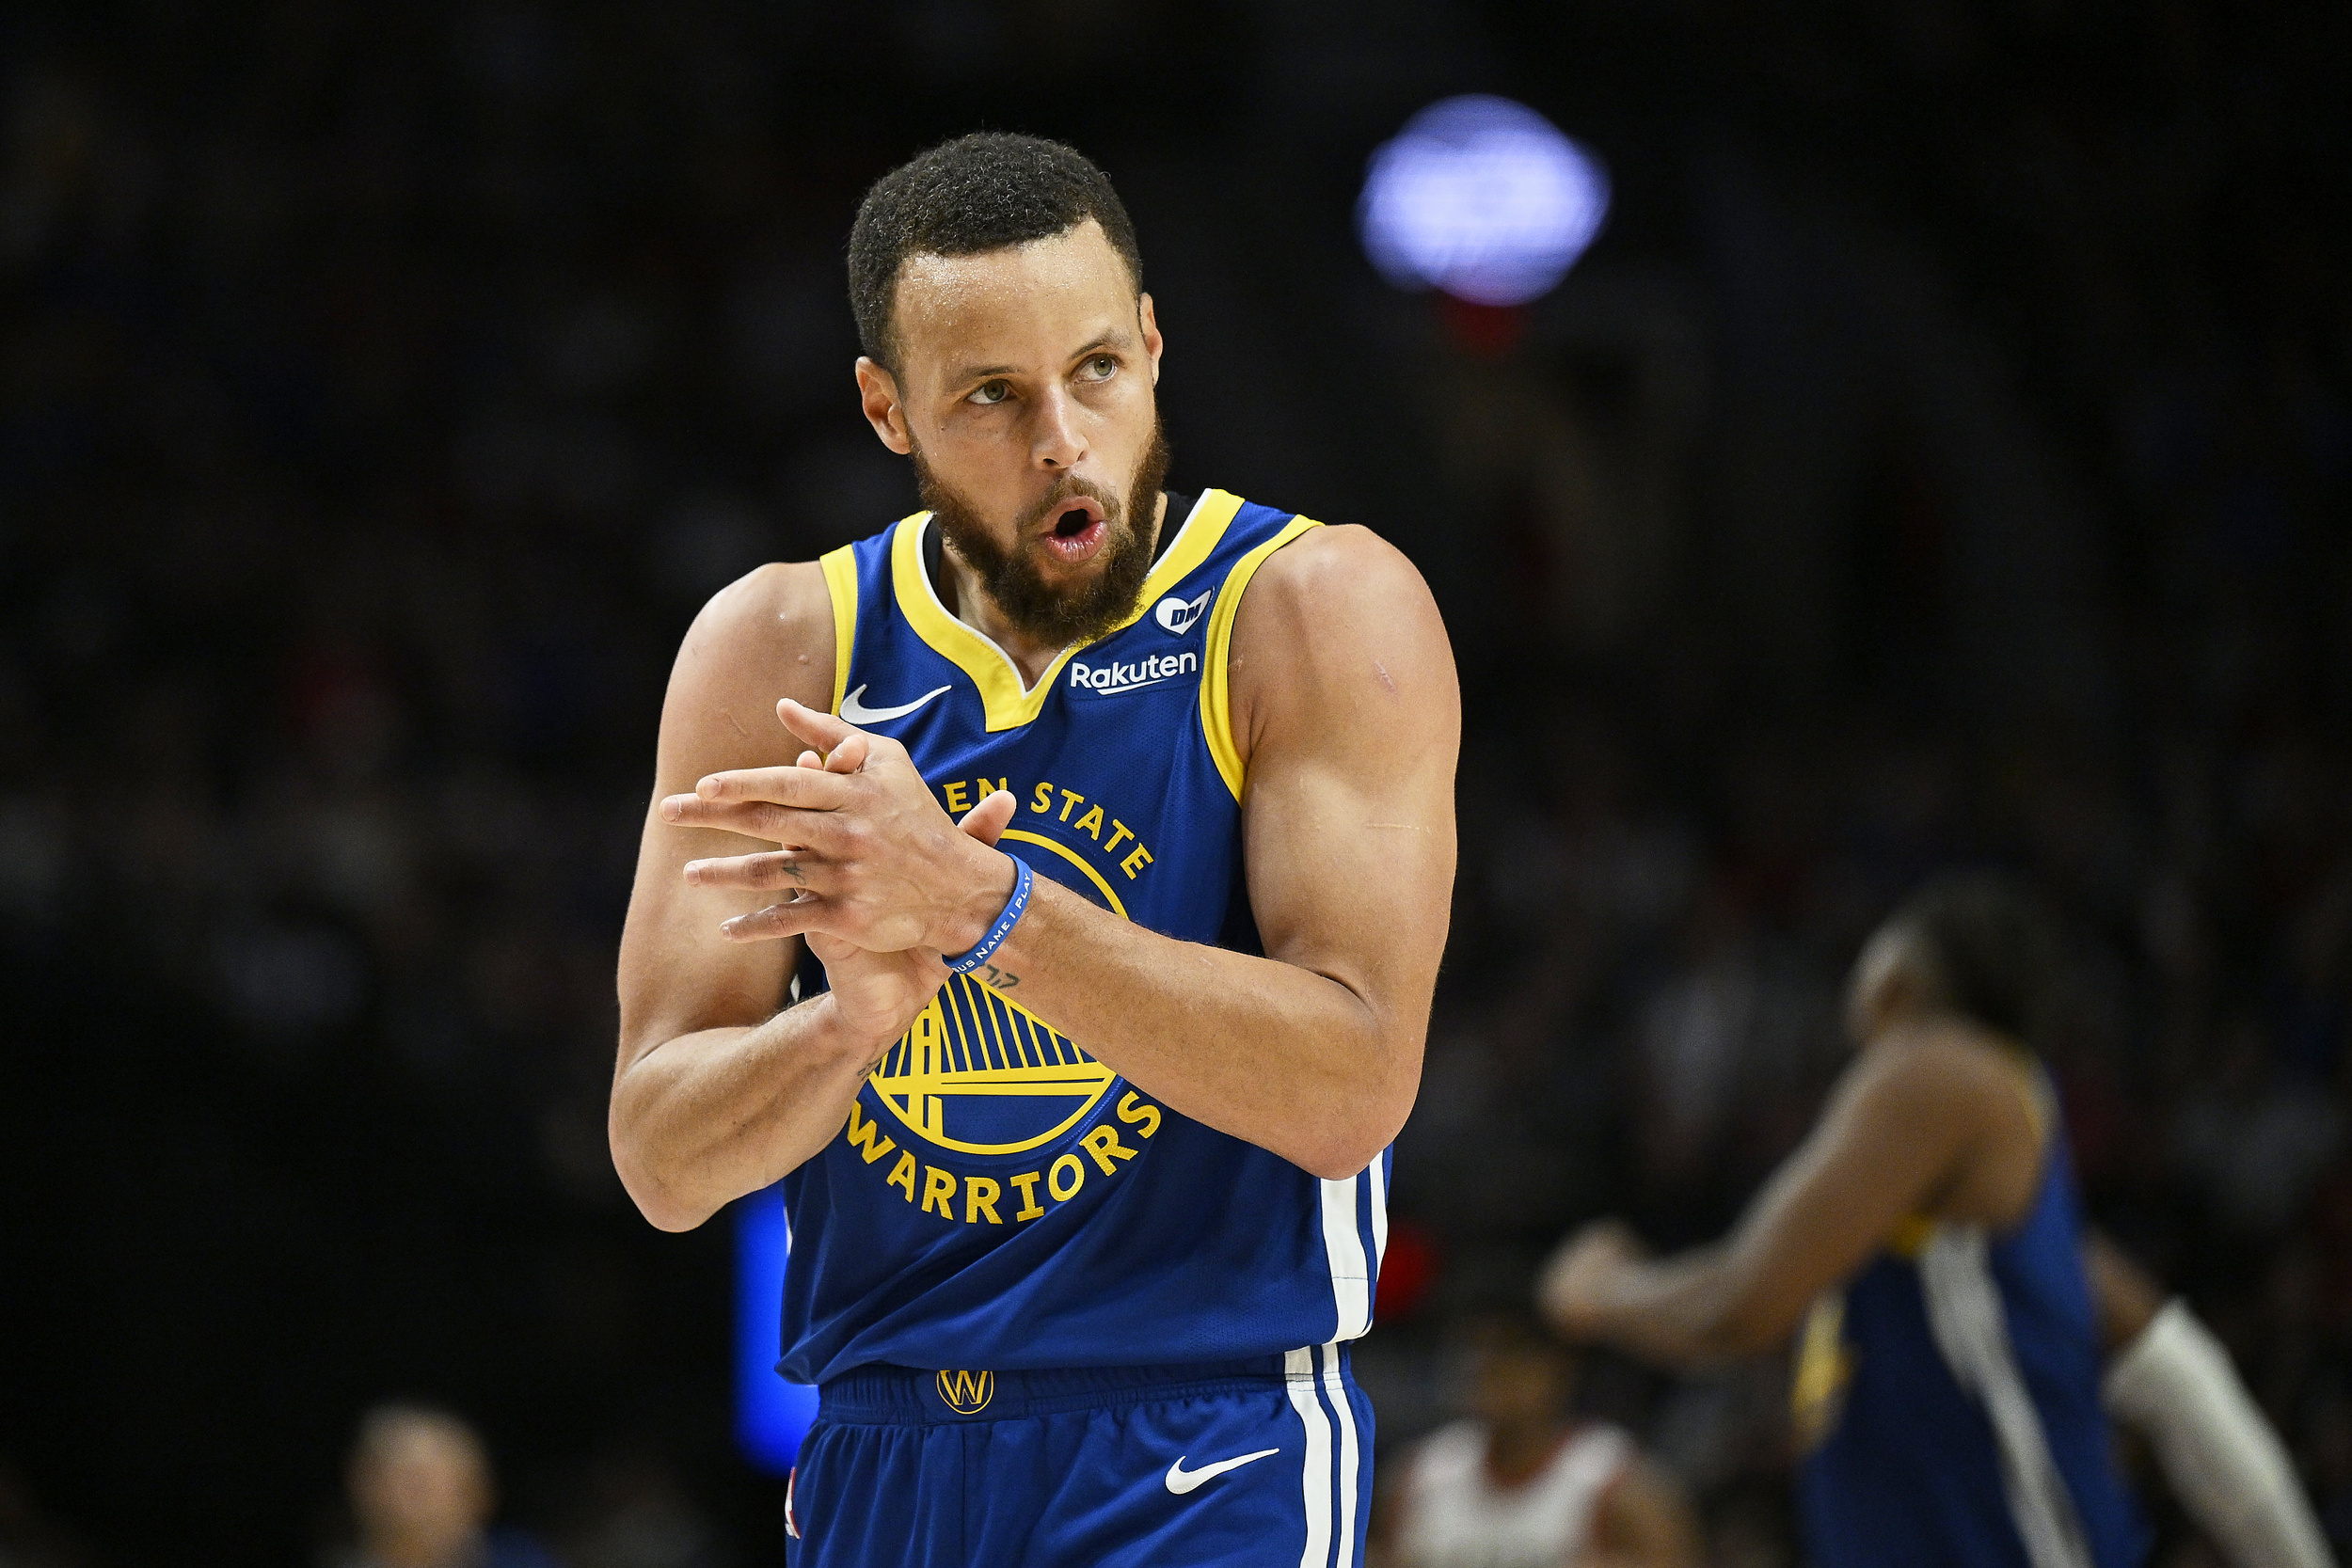 warriors could sacrifice eighth seed in favor of rest